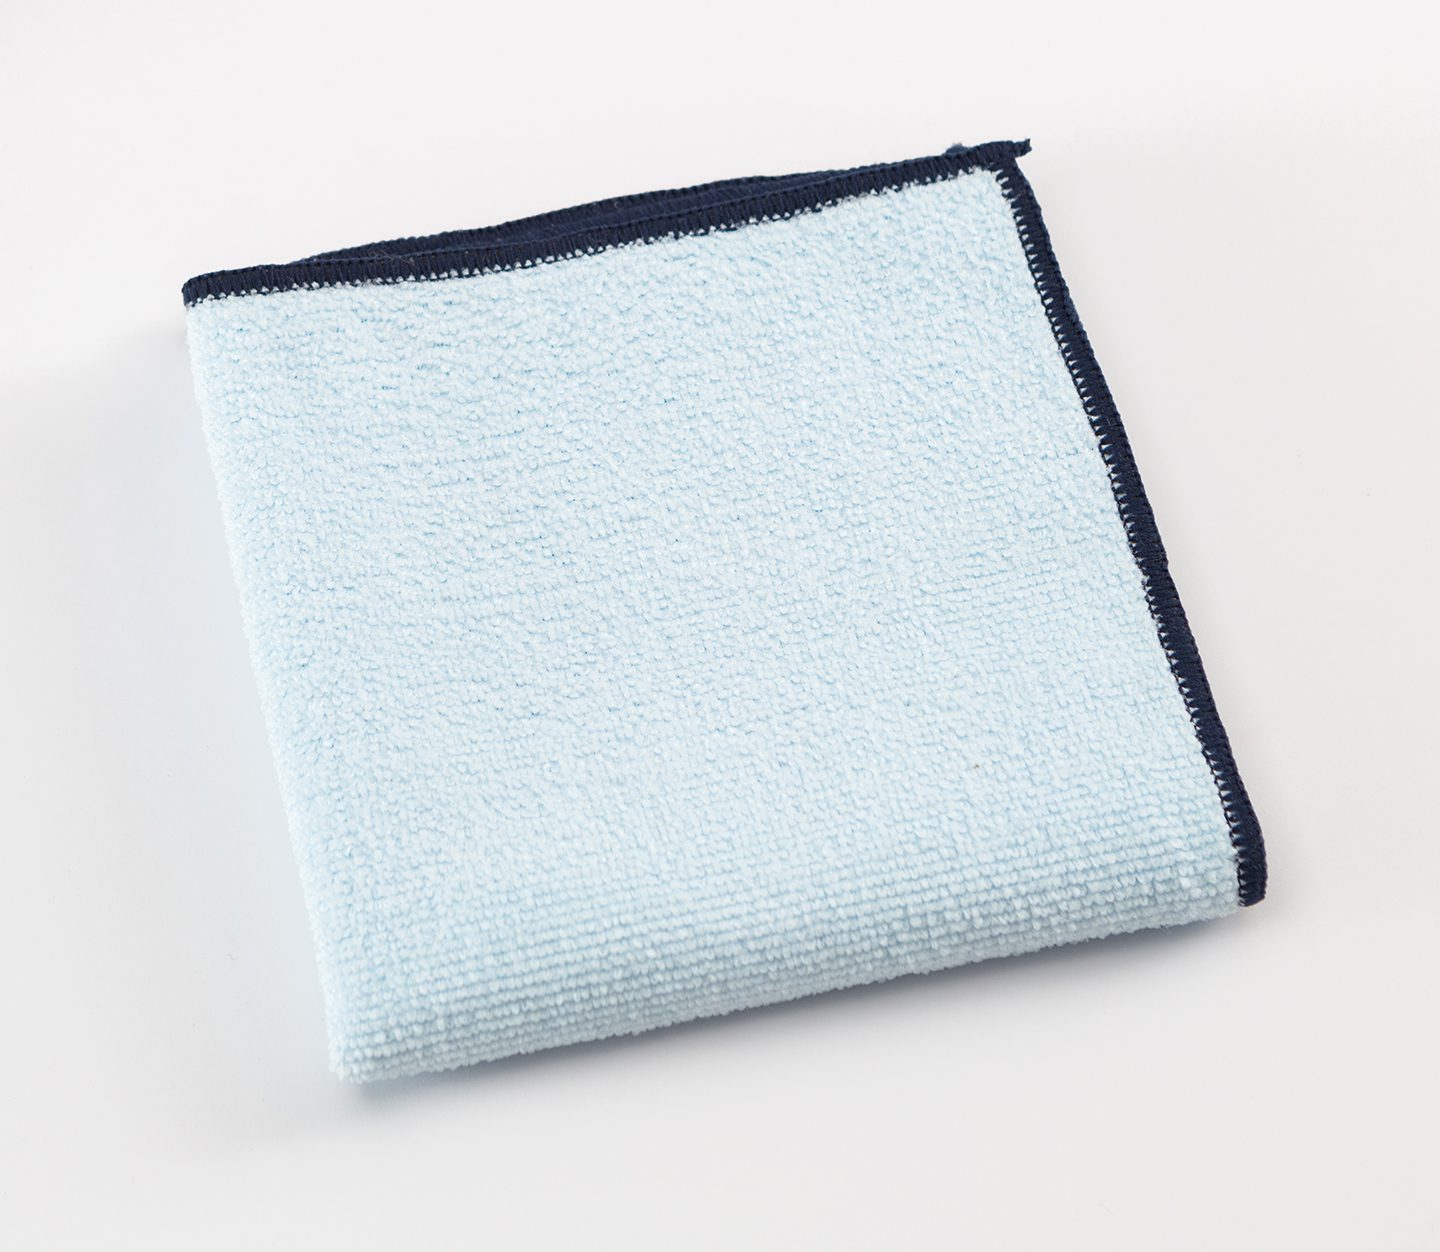 The Benefits of Microfiber for Hoteliers